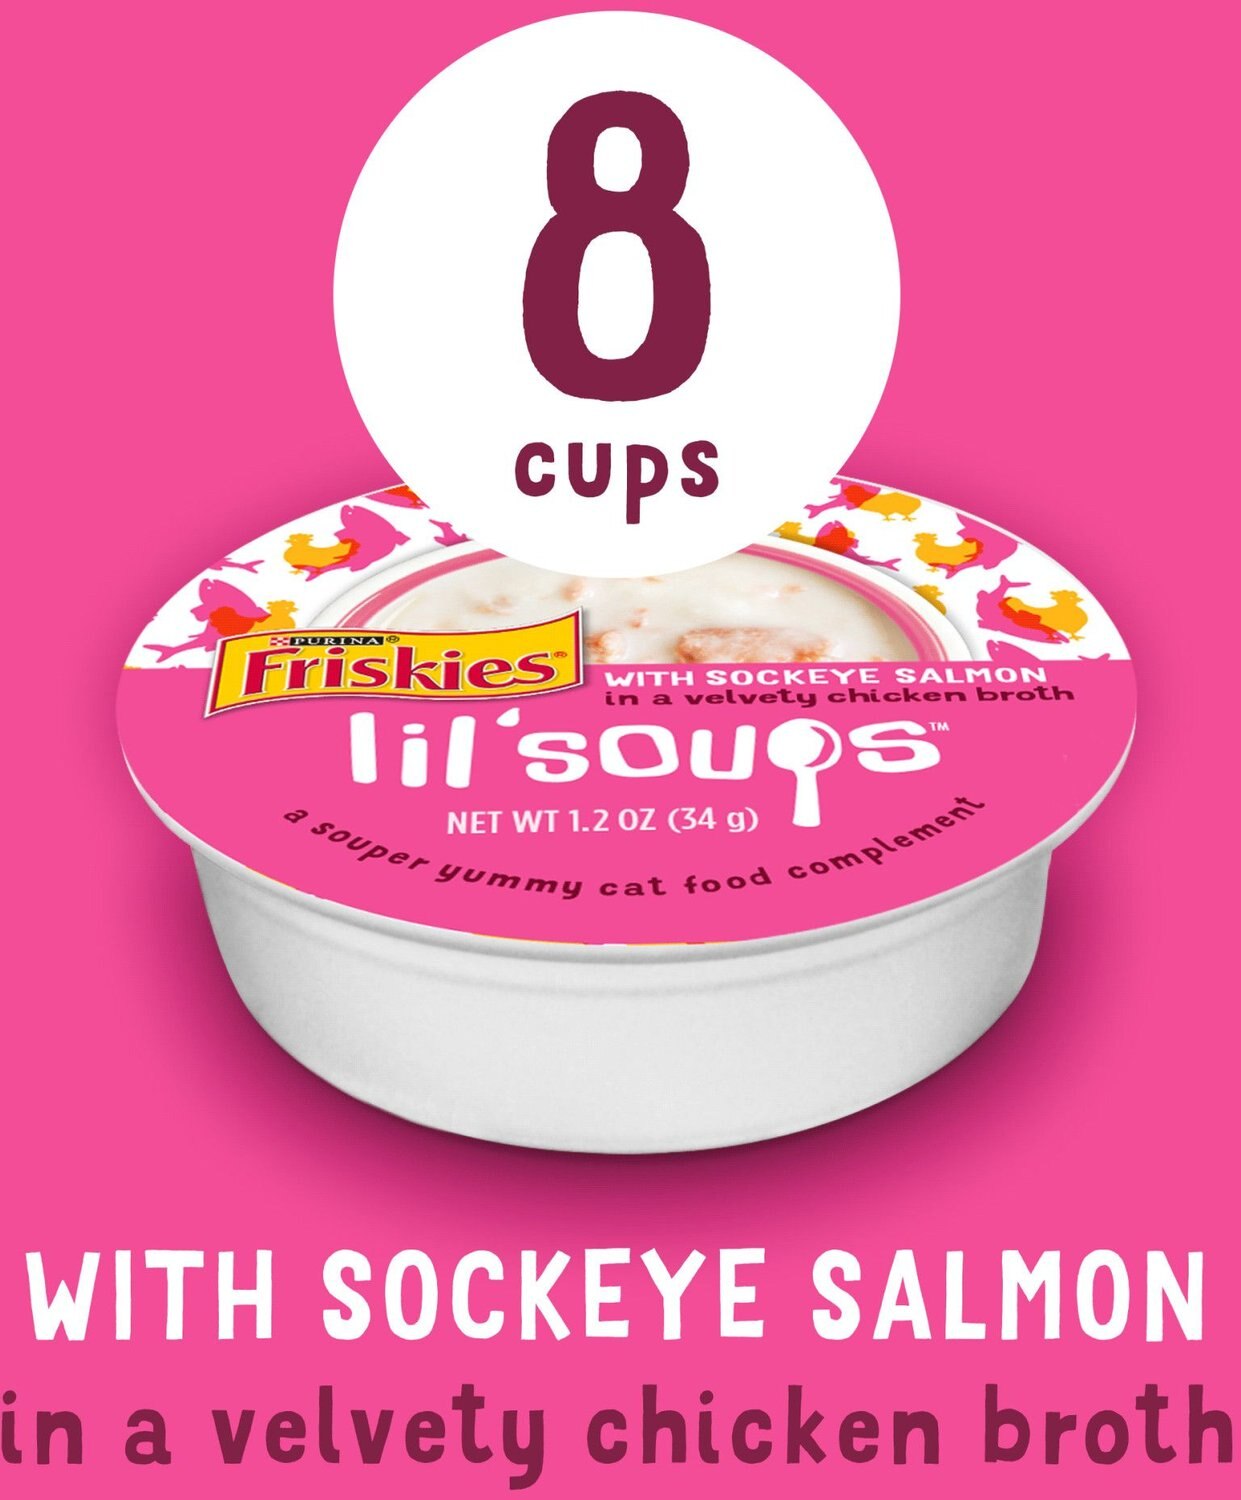 FRISKIES Lil' Soups with Sockeye Salmon in a Velvety Chicken Broth